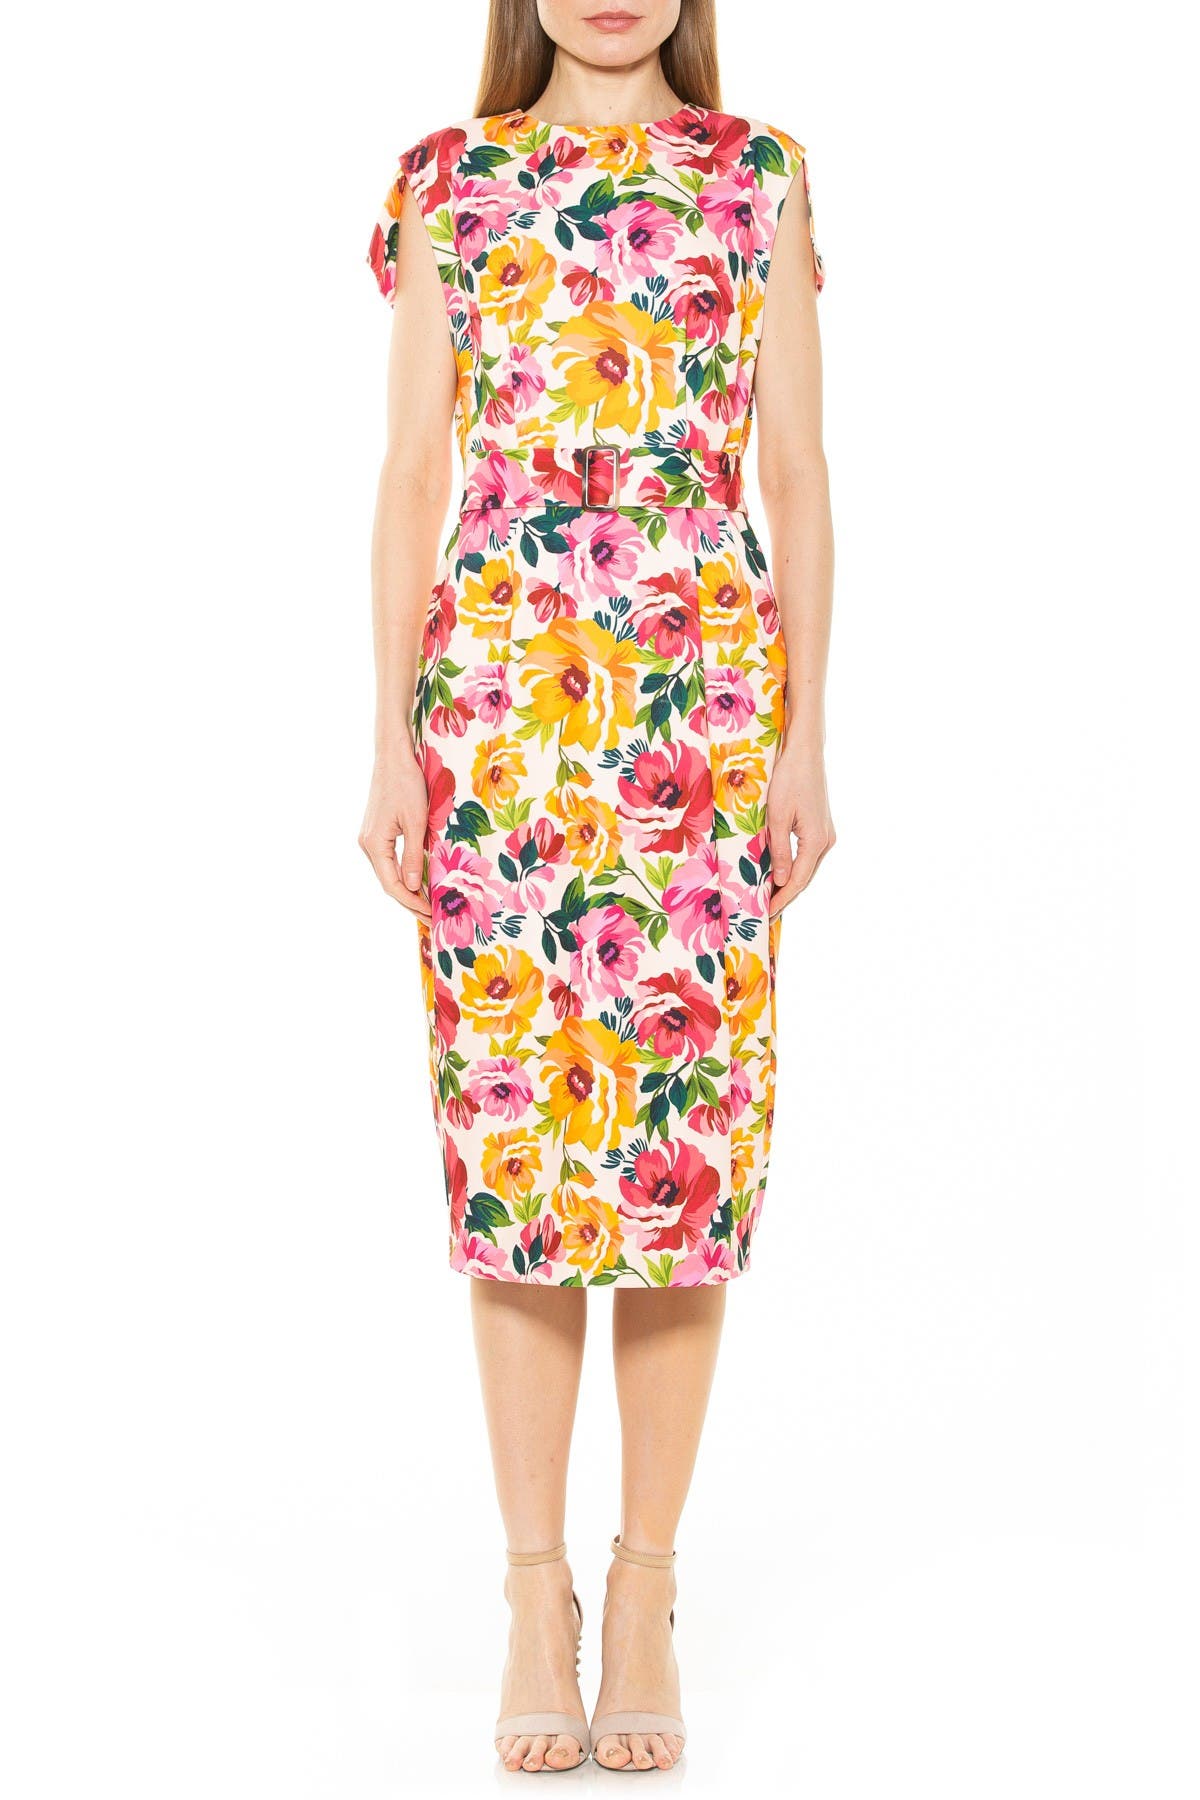 Alexia Admor Belted Crew Neck Sheath Dress In Large Floral